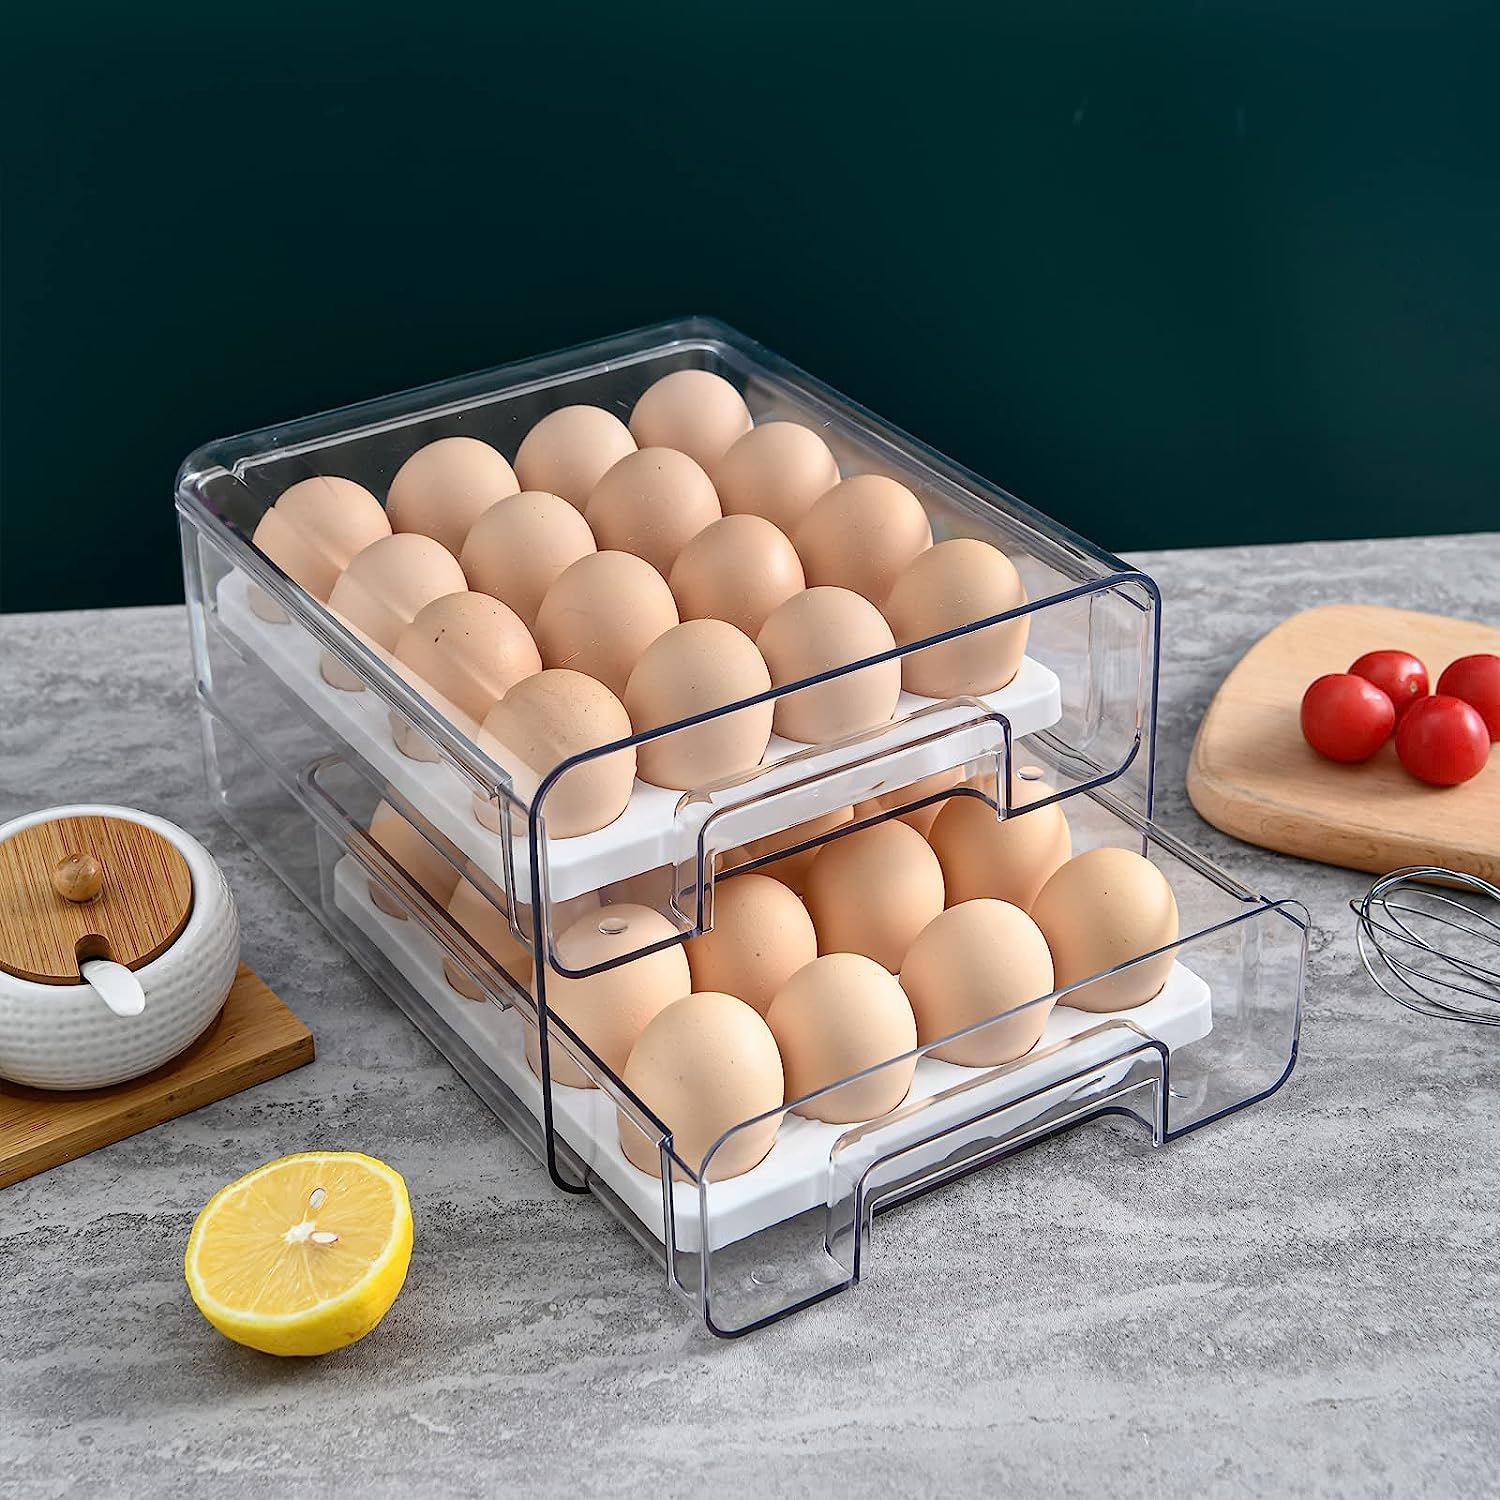 This Ceramic Egg Holder Adds a Cool Aesthetic to Your Fridge